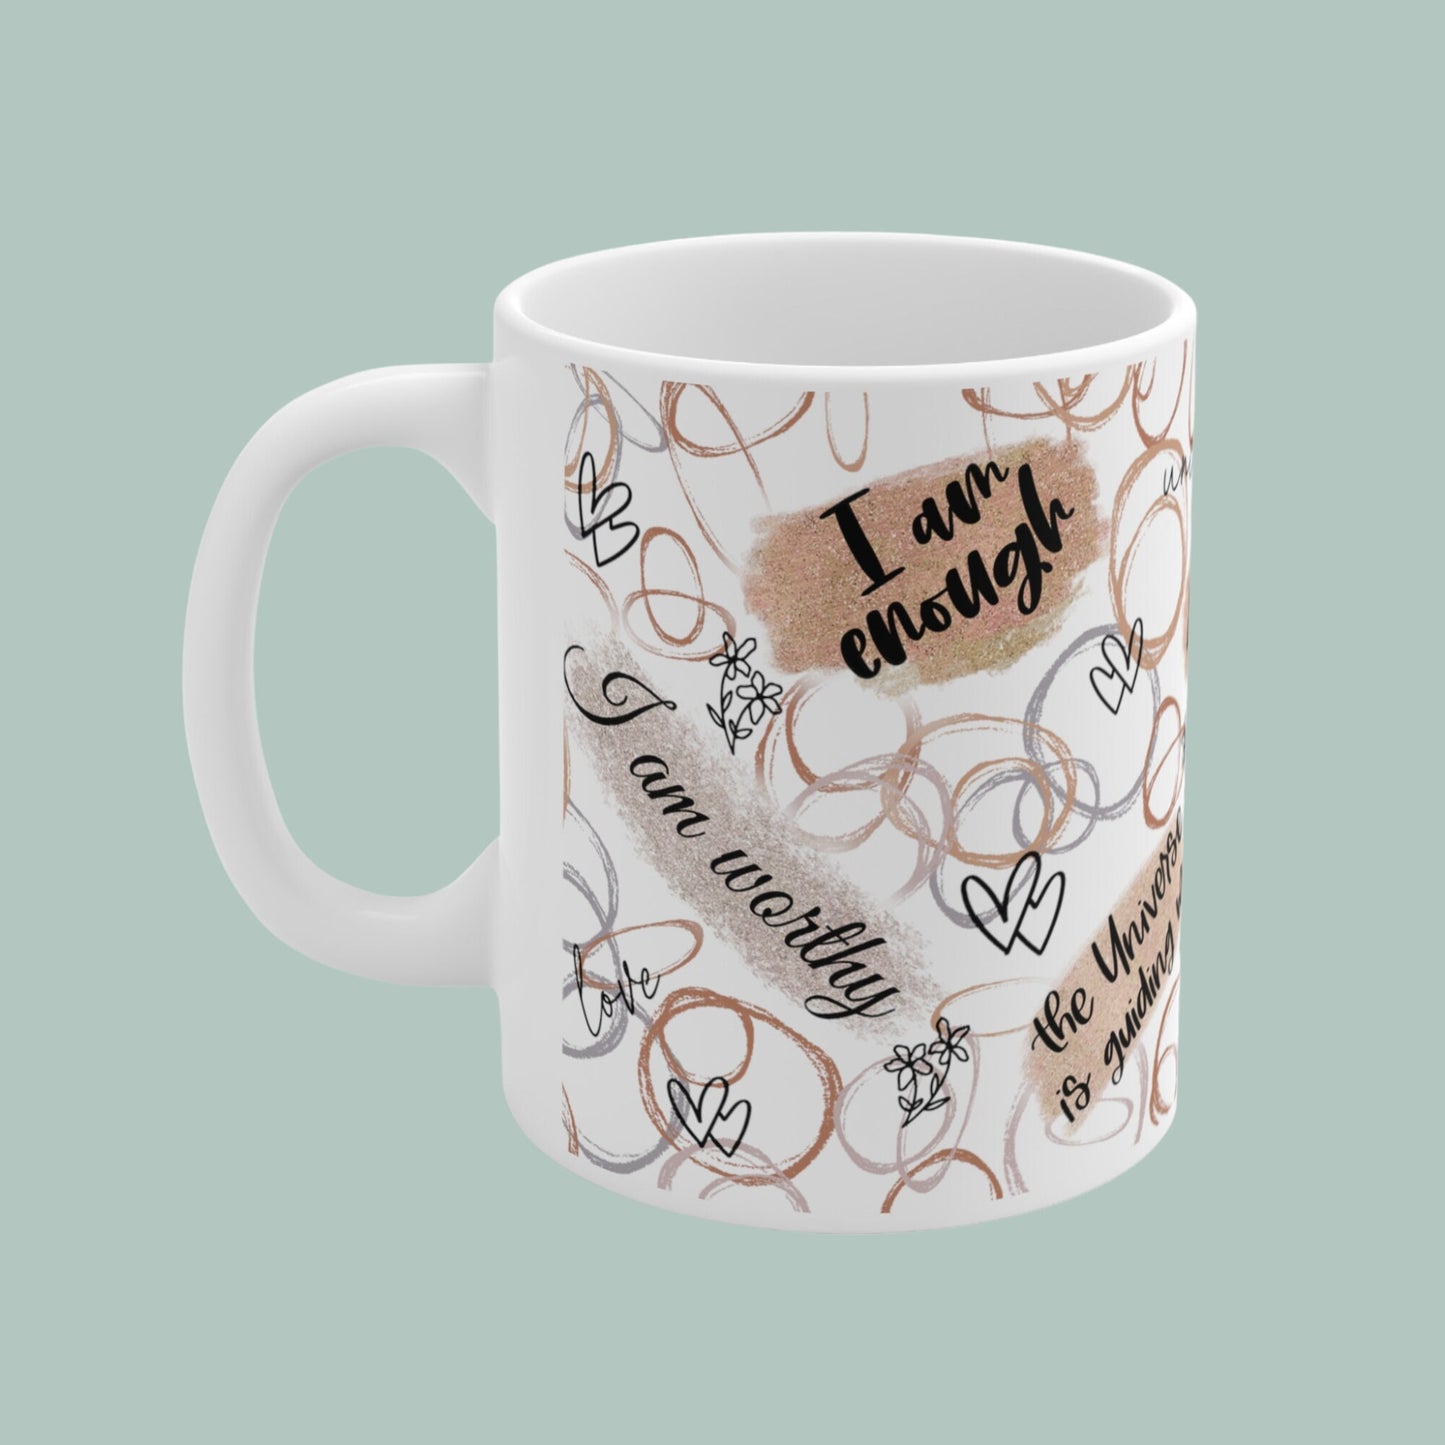 DAILY AFFIRMATION Coffee MUG You Are Special Mug Hot Beverage Cup For Hot Drink Lover Hot Chocolate Tea Coffee Believe In Yourself Positive